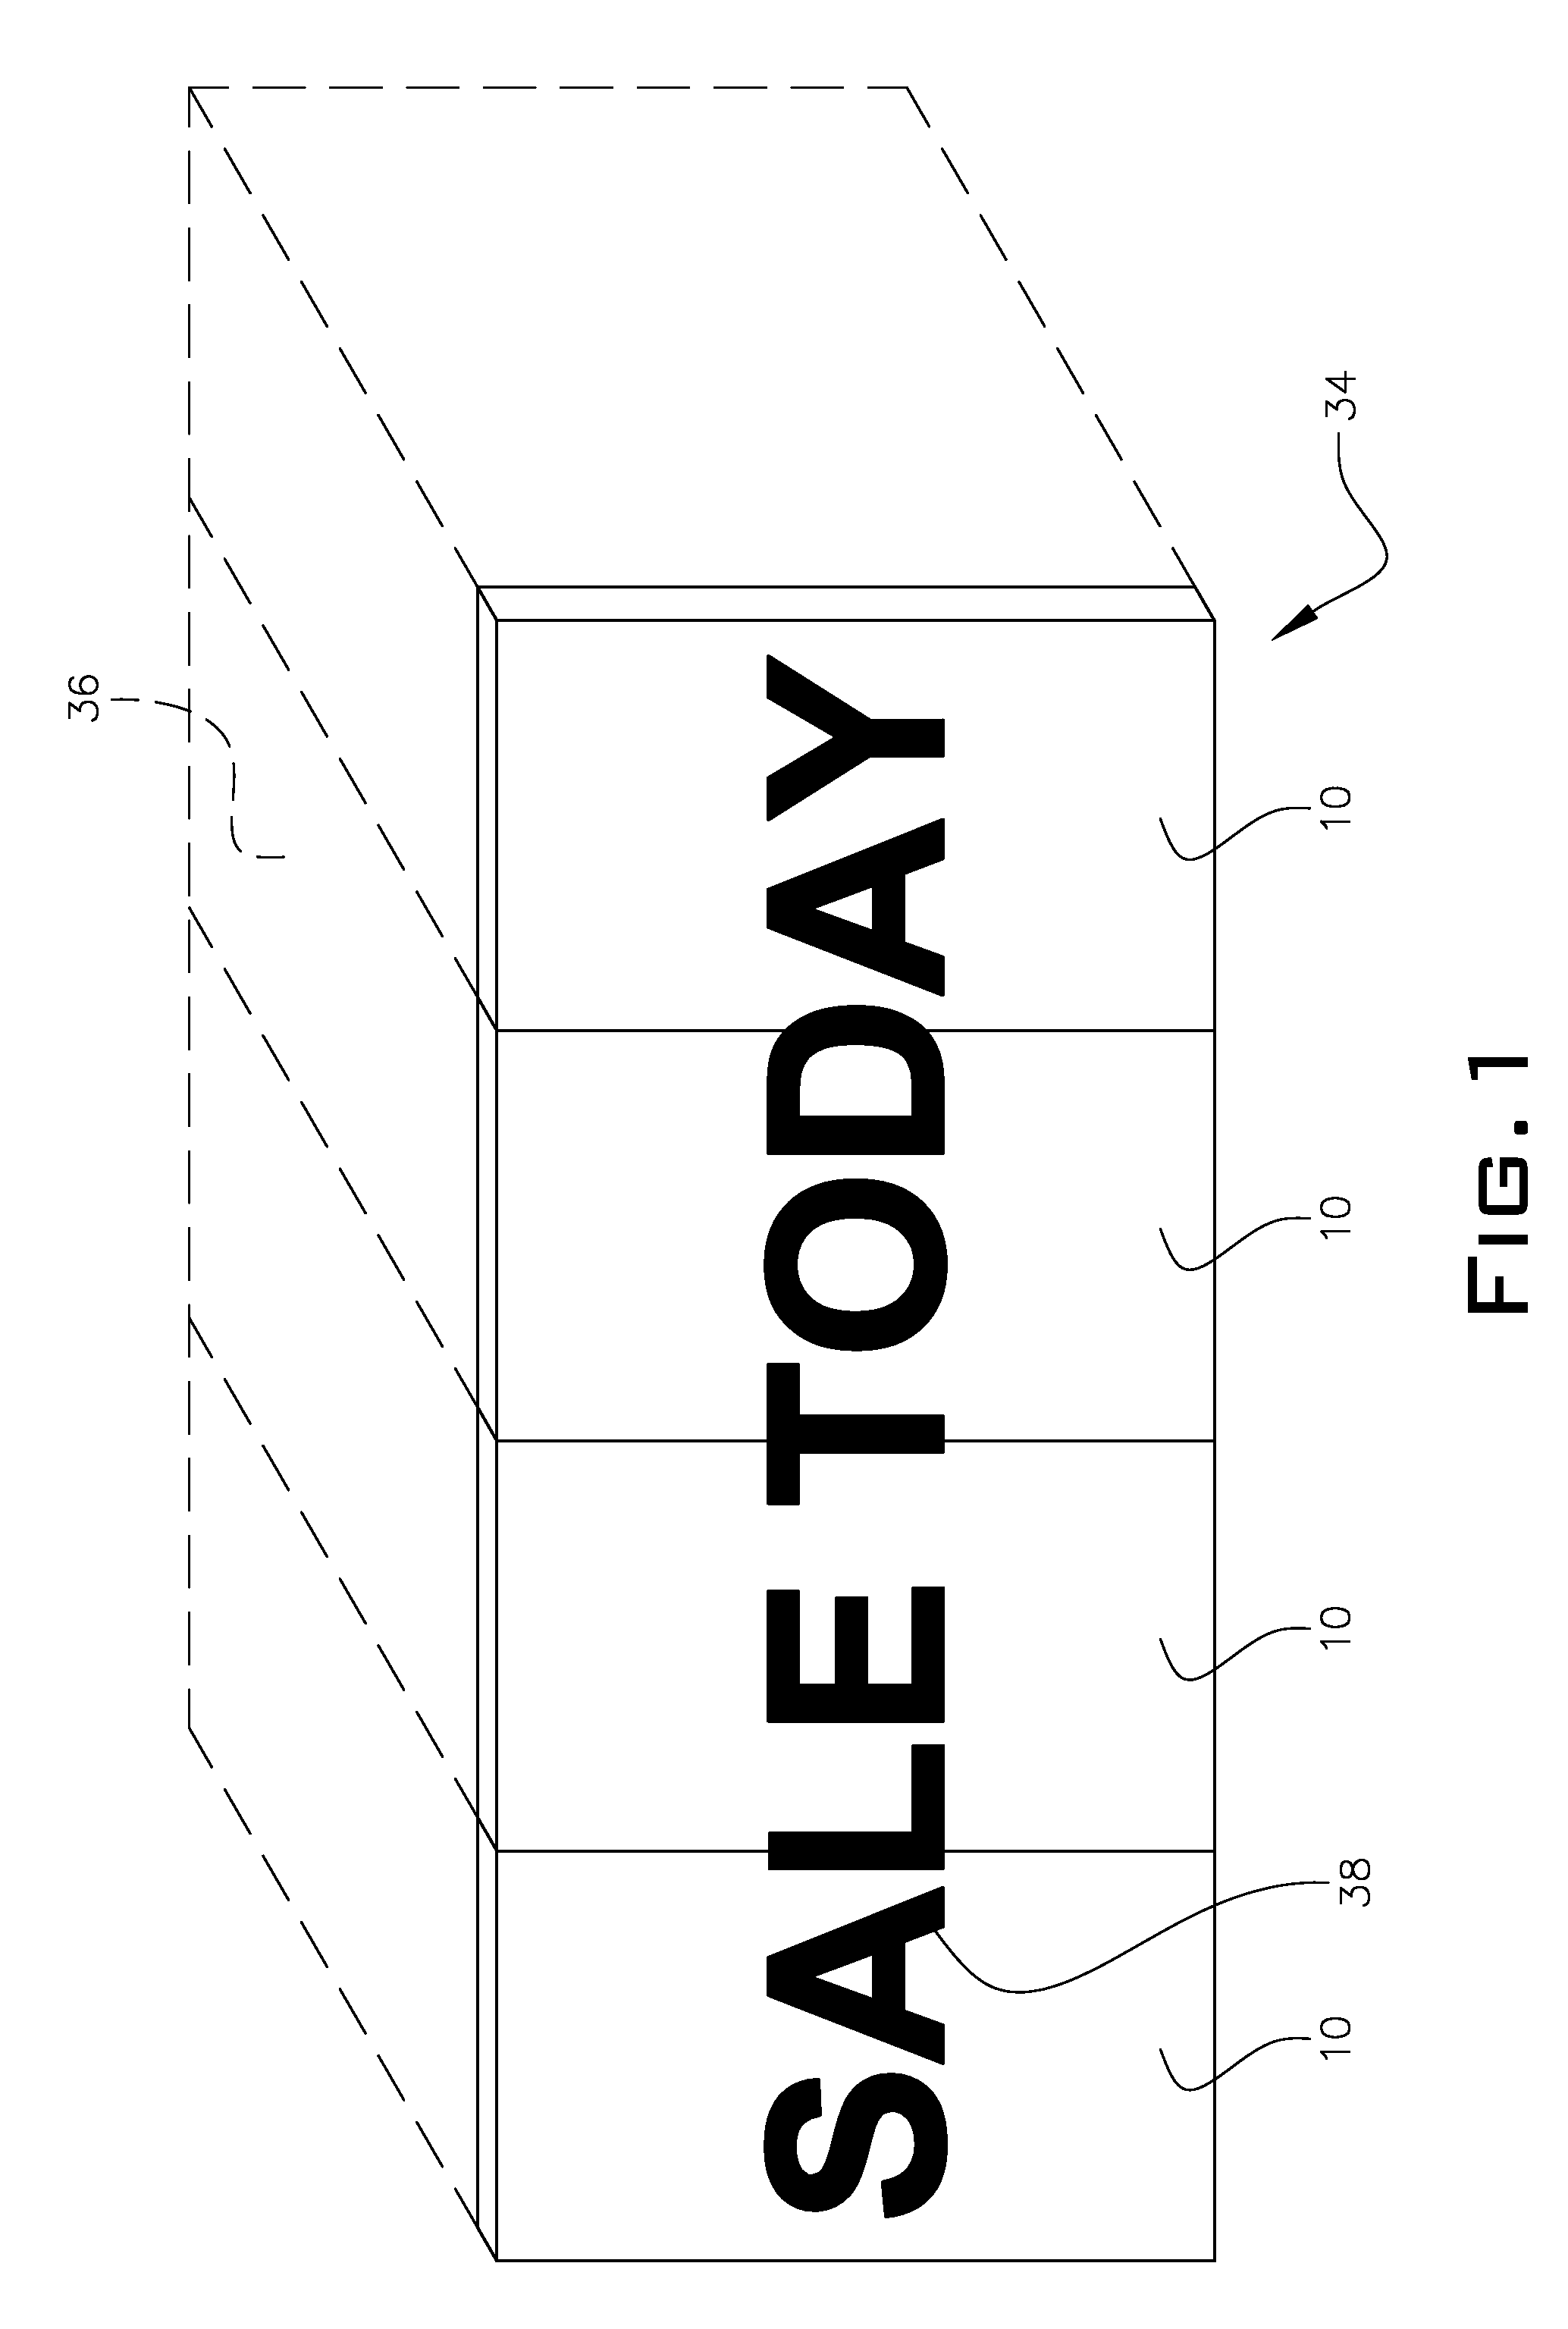 Modular electronic sign and method of assigning a unique identifier to common modules of said sign